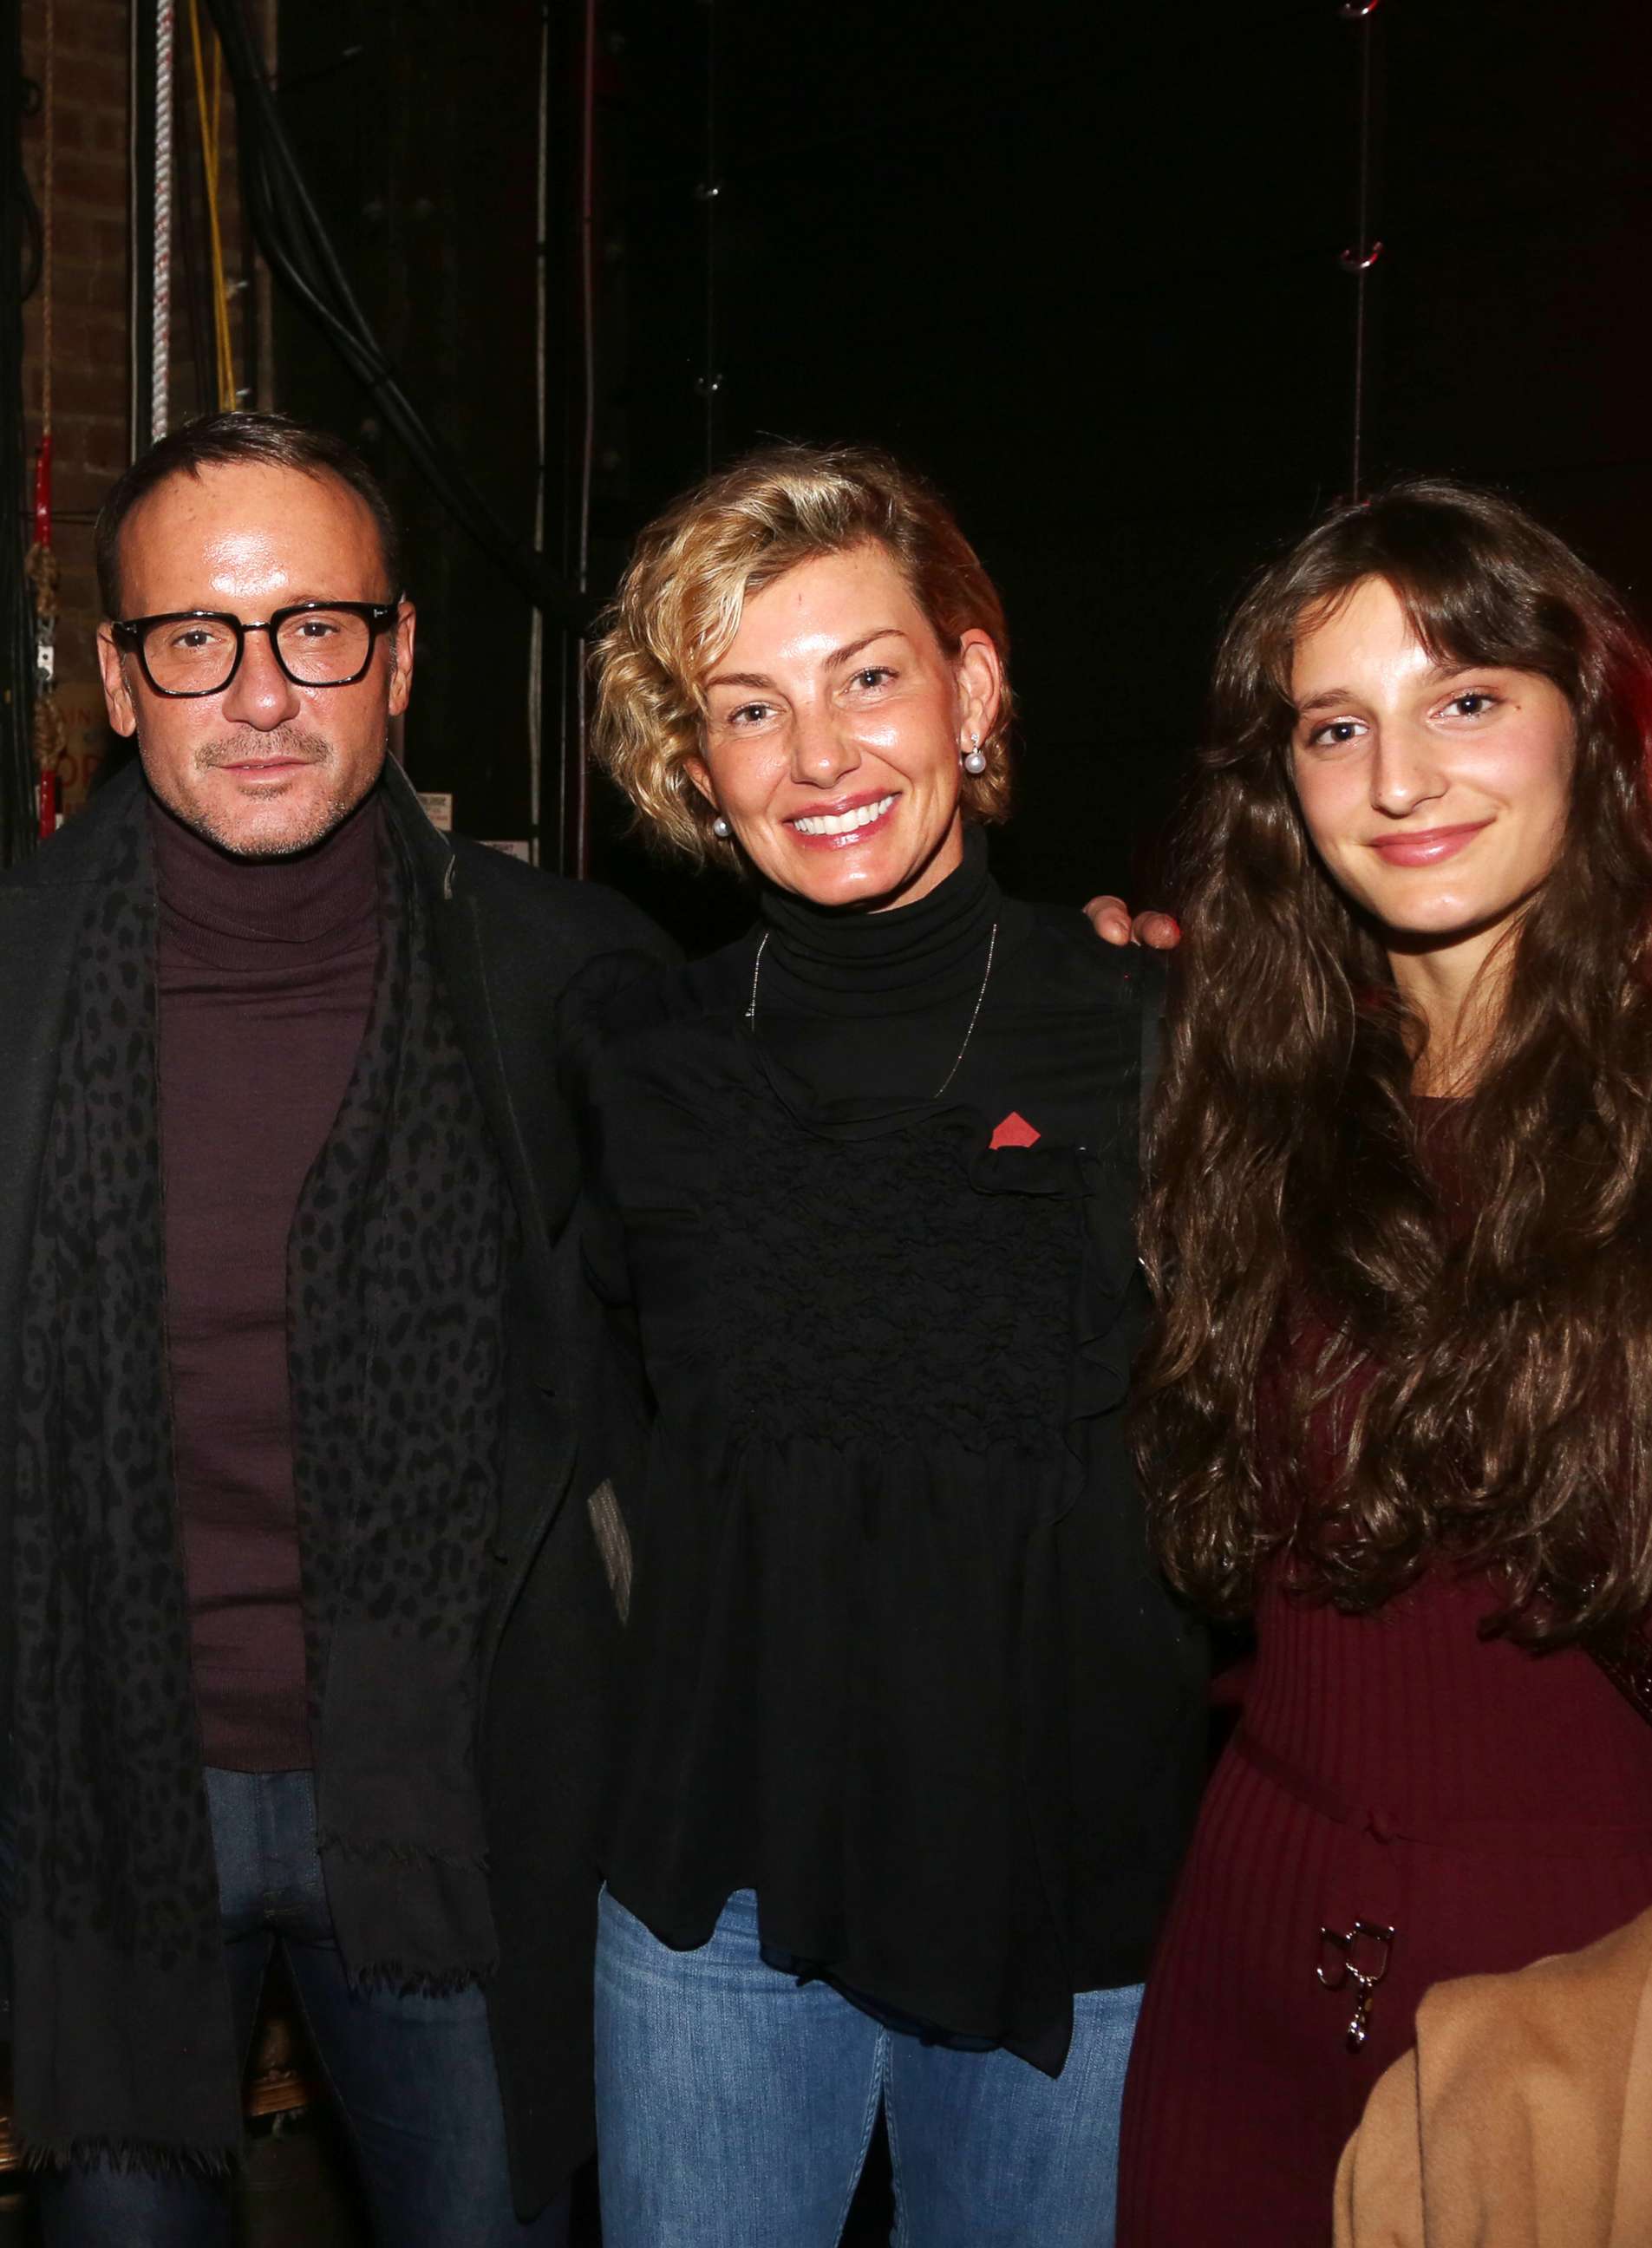 PHOTO: FILE - Tim McGraw, wife Faith Hill and daughter Audrey Caroline McGraw pose backstage at the hit musical based on the Baz Luhrmann film "Moulin Rouge!" on Broadway at The Al Hirshfeld Theatre, Jan. 18, in New York City.